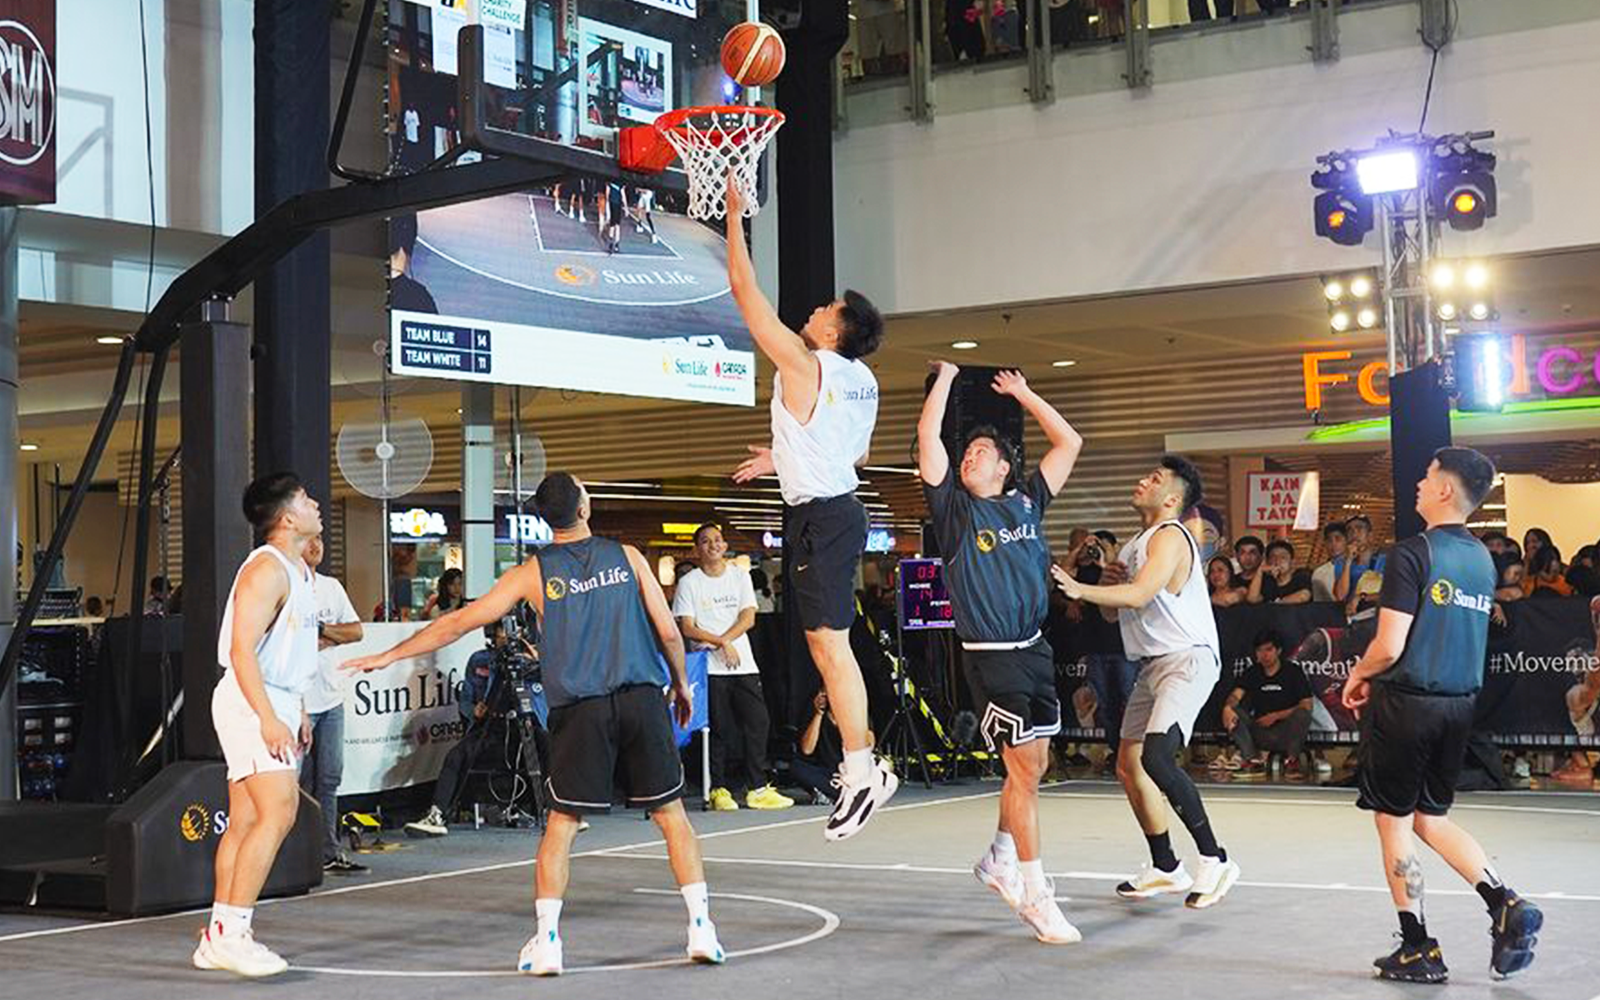 League pros and celebrity players in action during the Sun Life 3x3 Charity Challenge